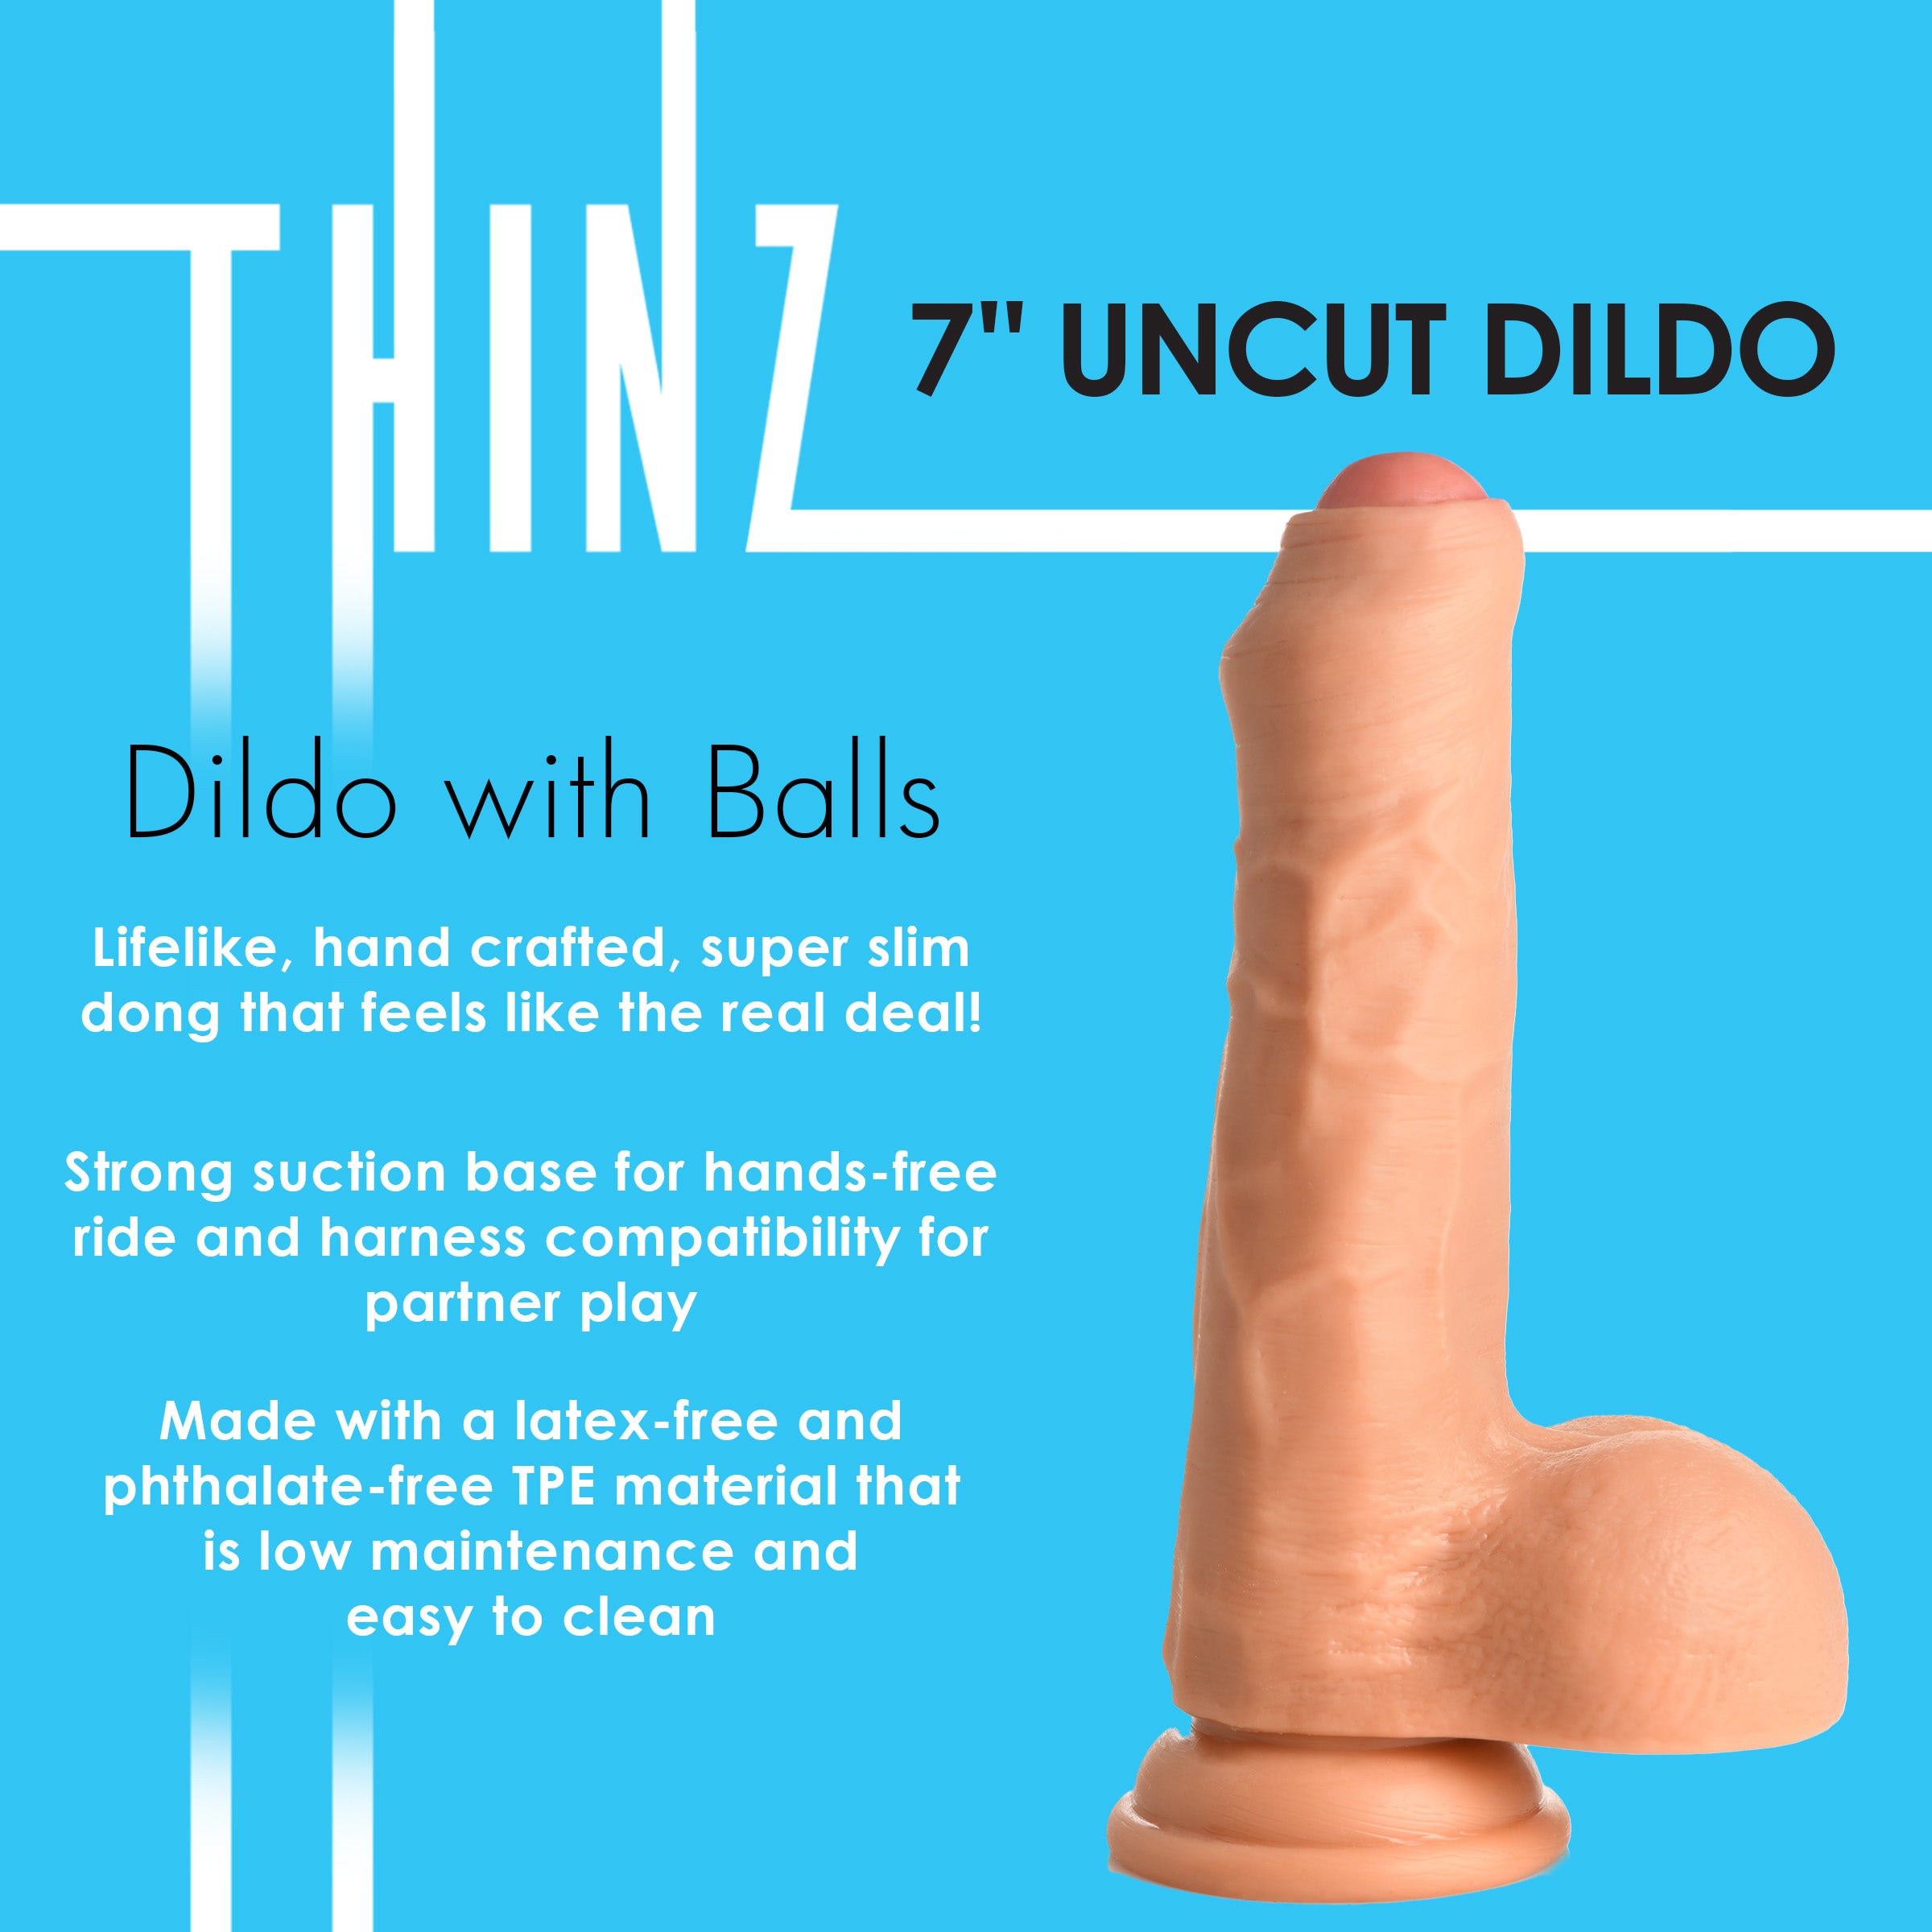 8 Inch uncut Dildo with Balls